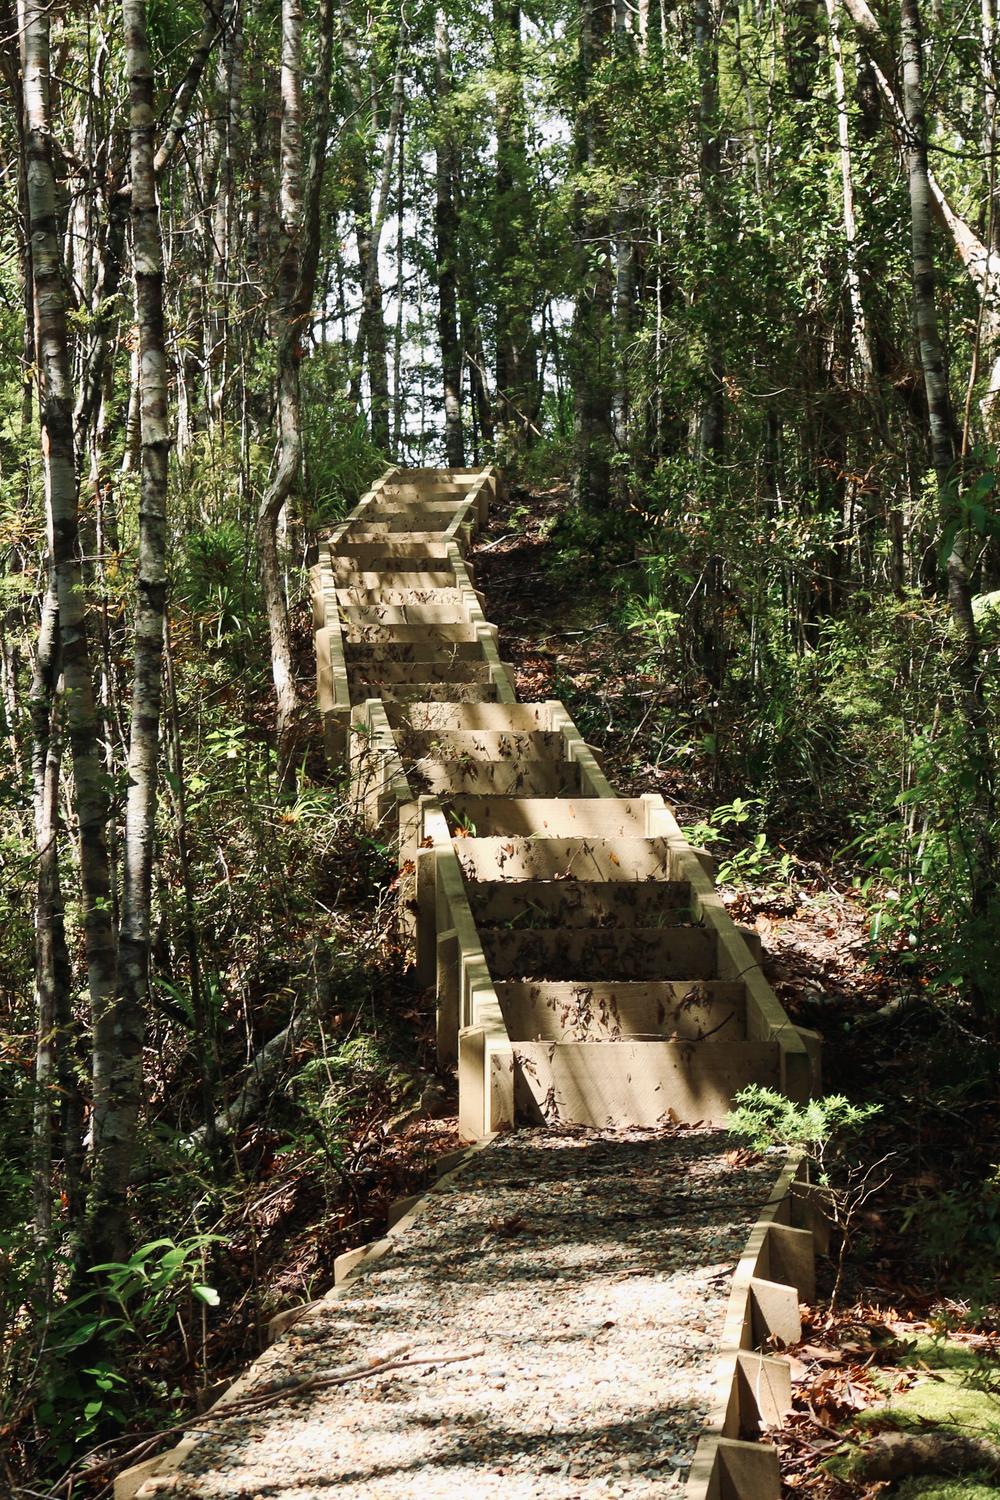 A sample of the never-ending steps.